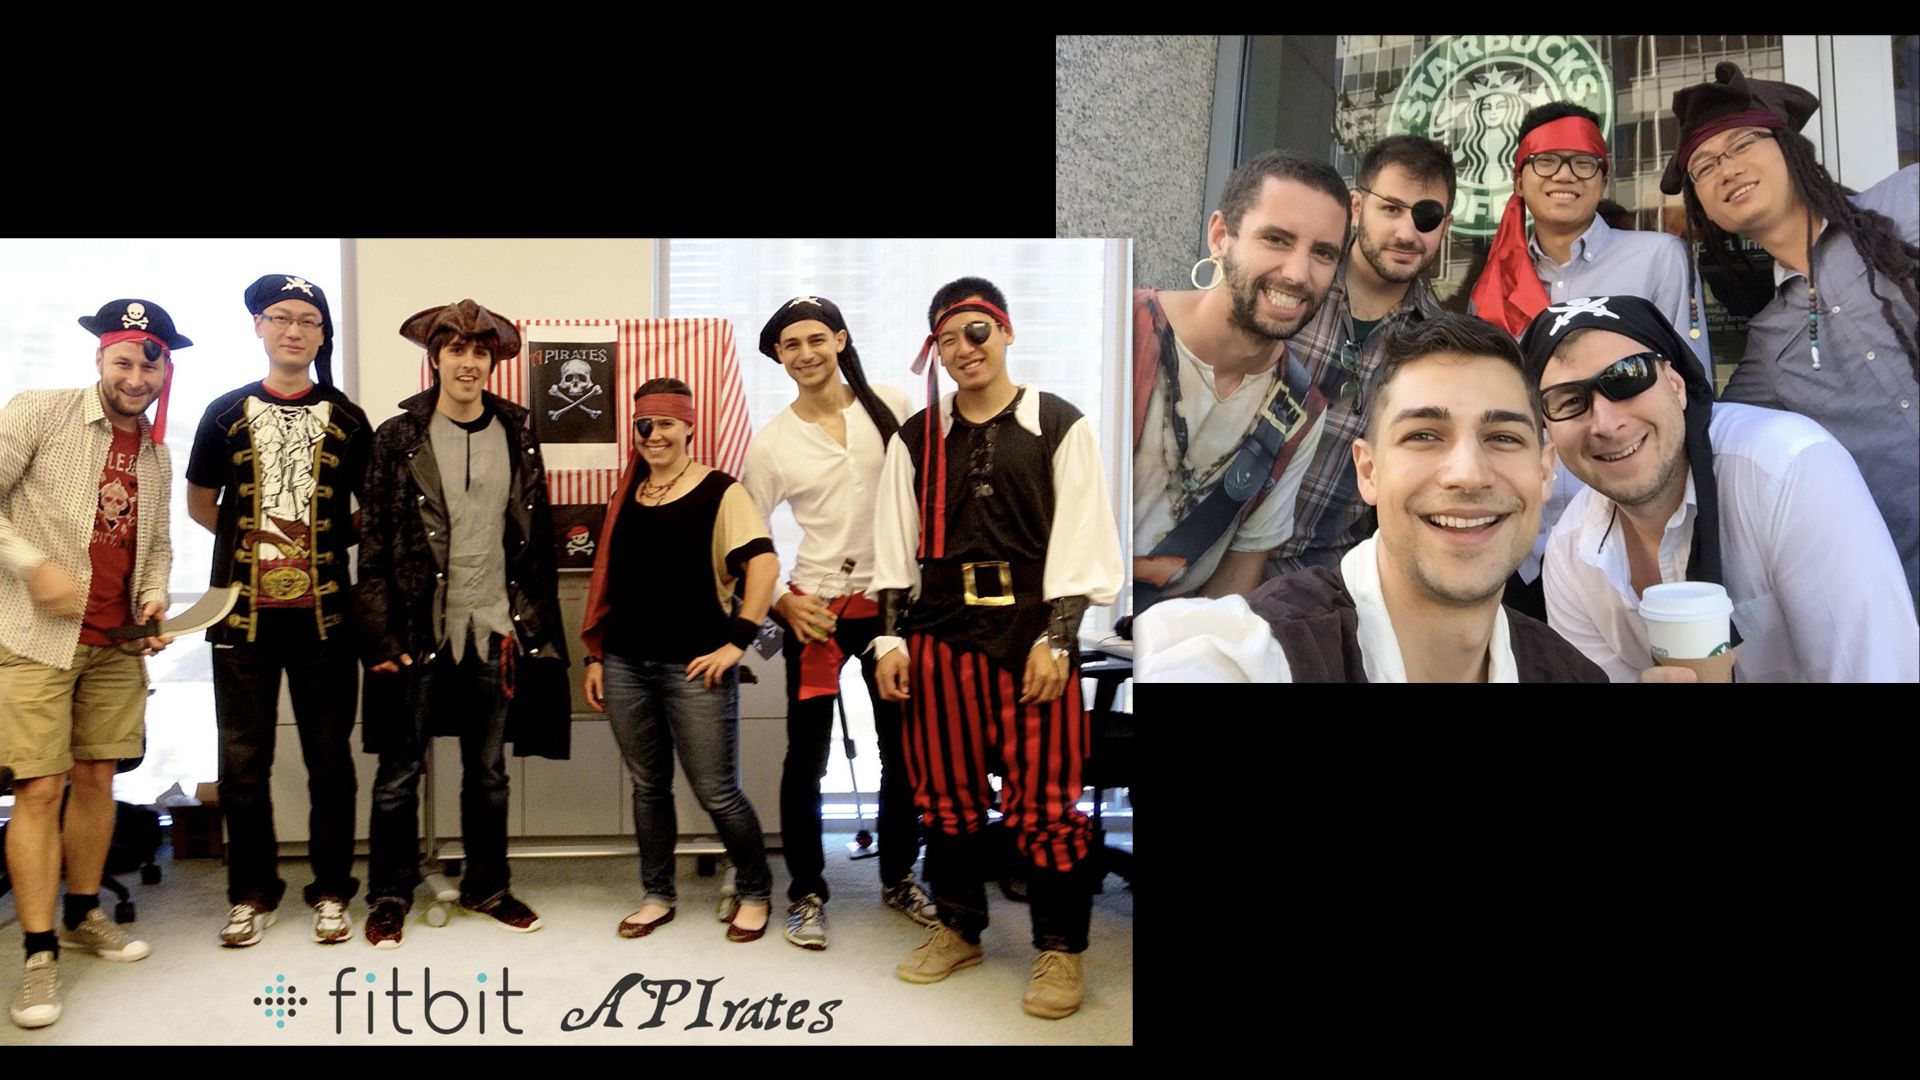 Group of people dressed as pirates in the Fitbit office: the APIrates.